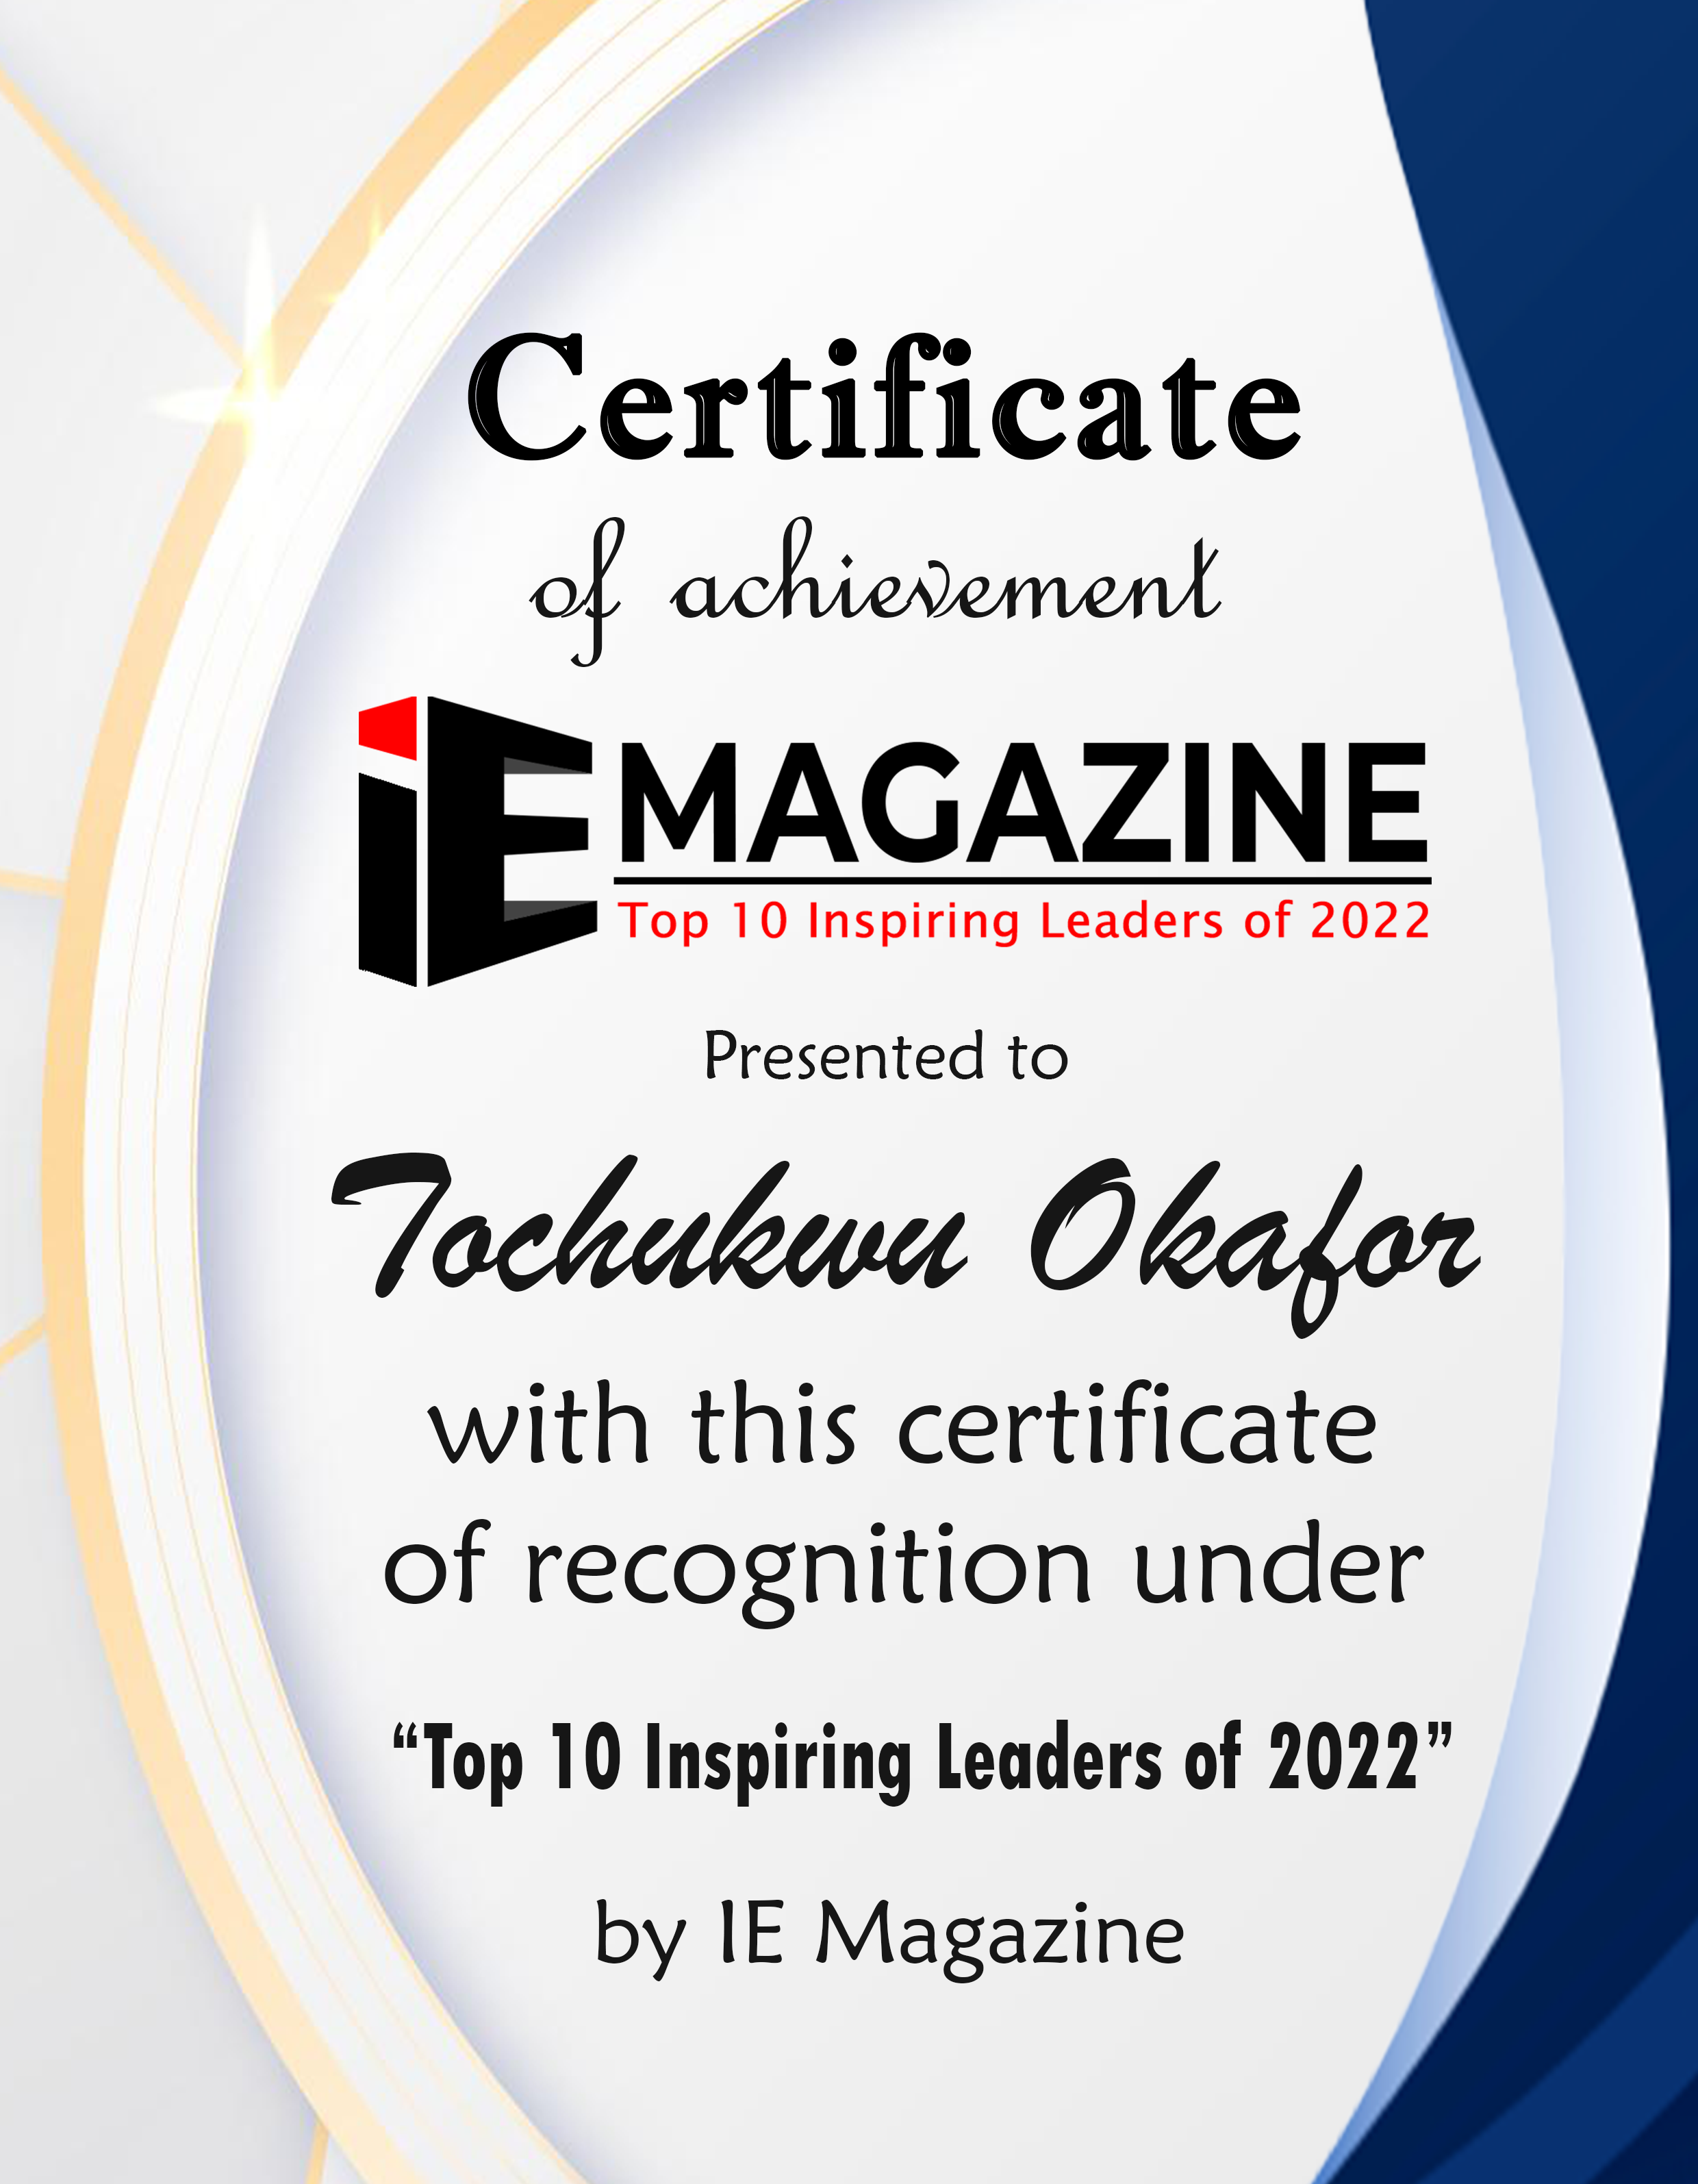 Tochukwu Okafor, President & CEO of Lintoc Care LLCs Certificate